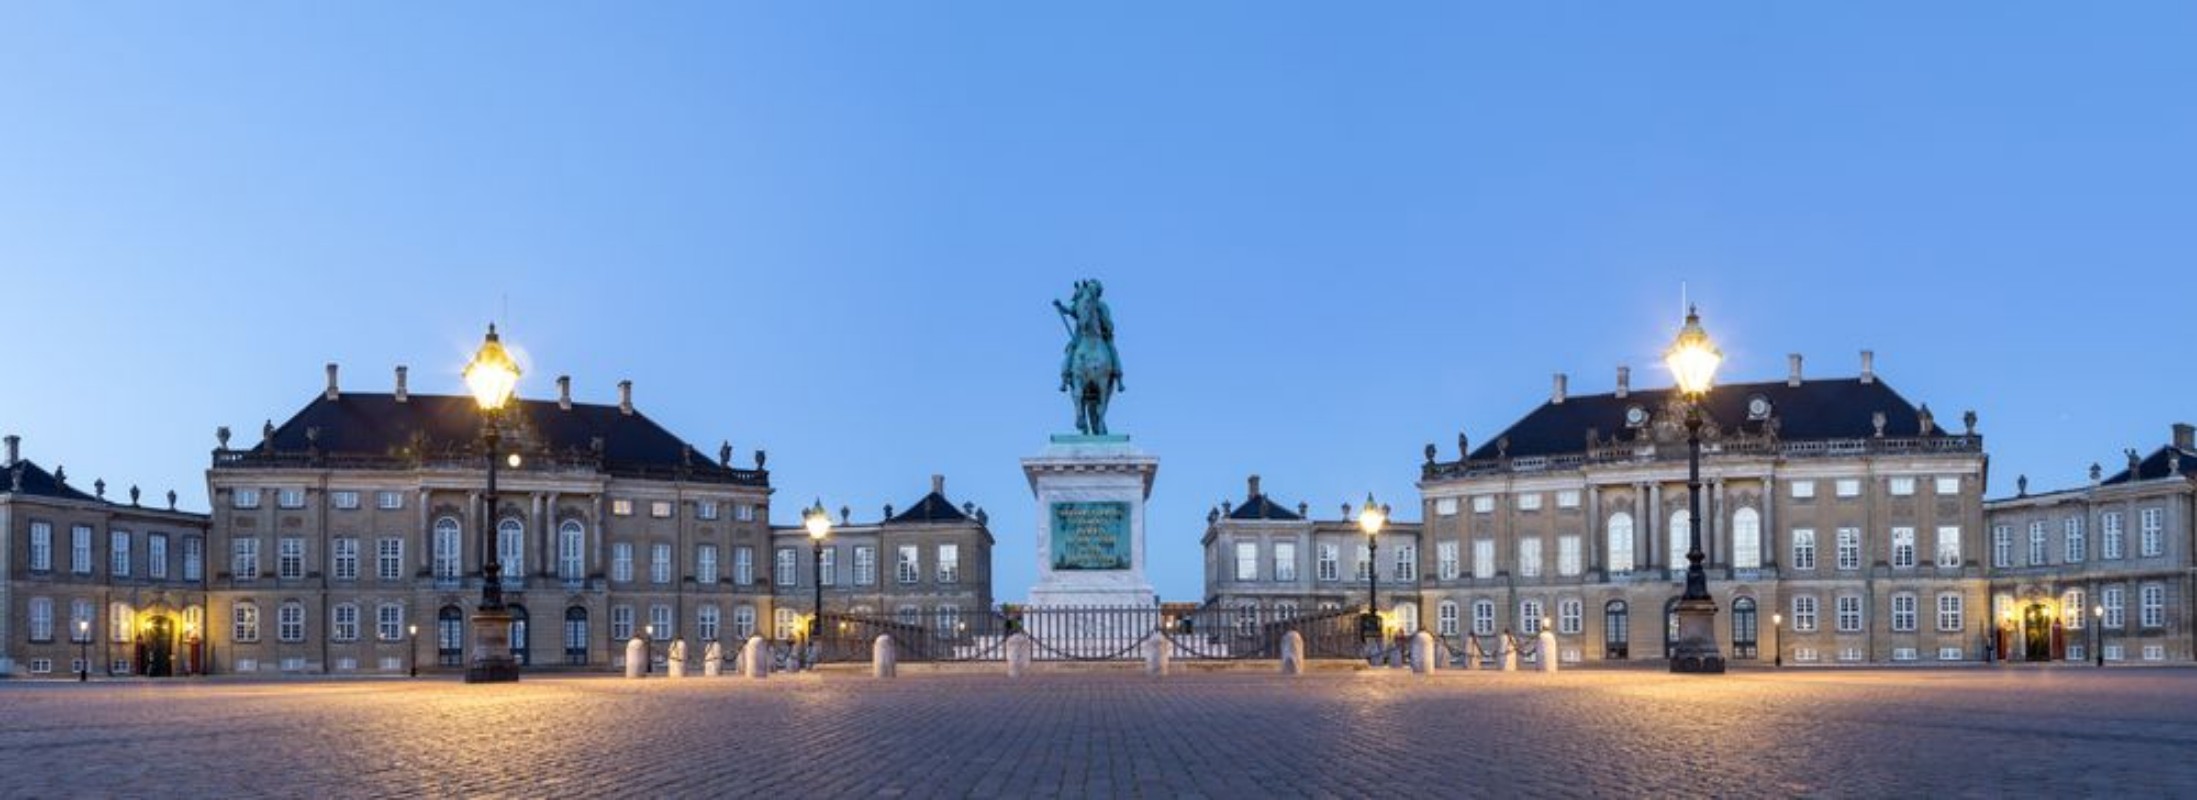 Picture of Amalienborg Palace in Copenhagen by night